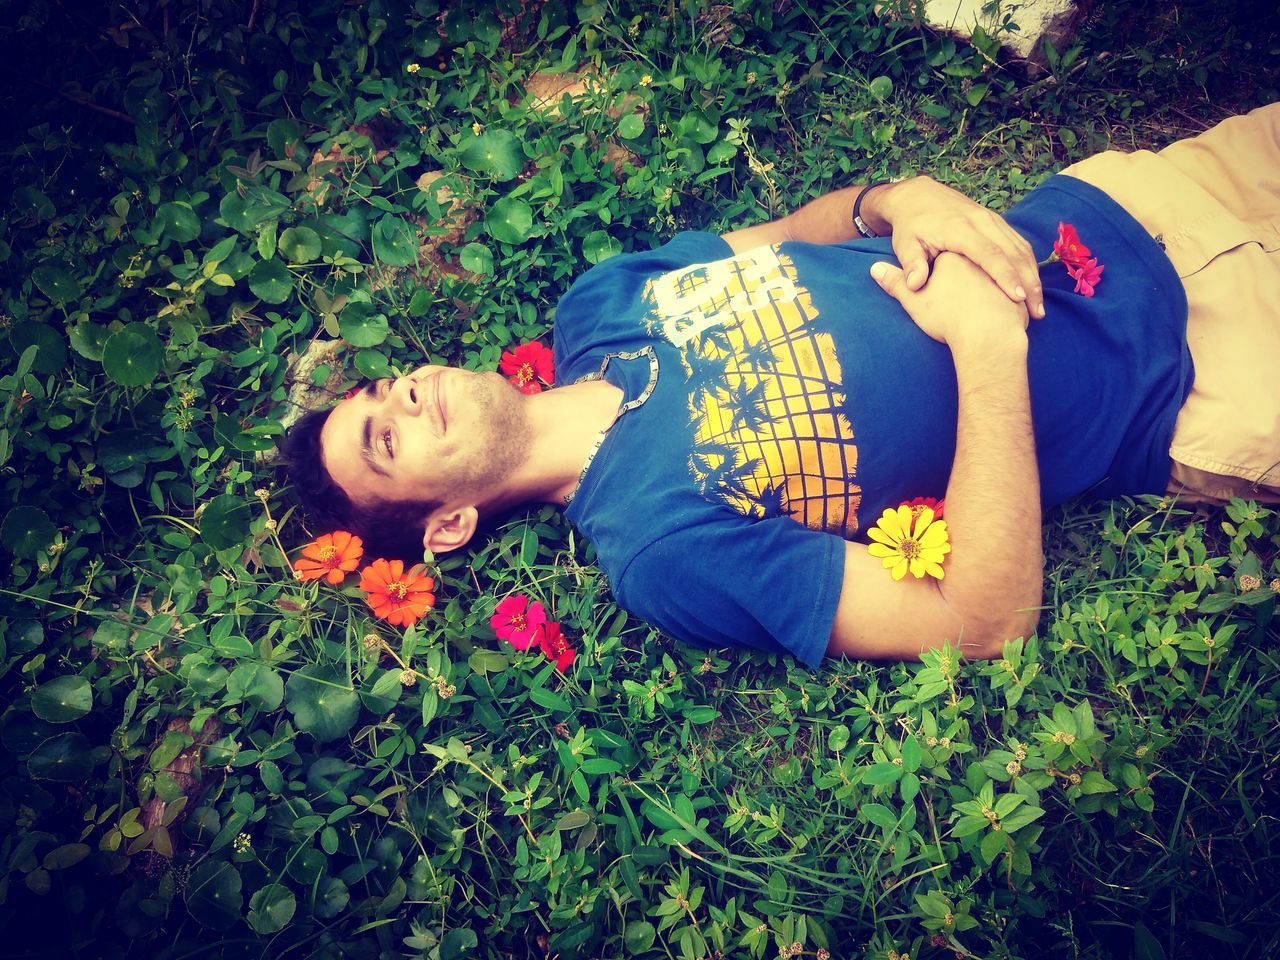 plant, lying down, nature, grass, one person, flower, high angle view, relaxation, field, land, leisure activity, lifestyles, day, growth, lying on back, green, flowering plant, outdoors, casual clothing, adult, blue, sunlight, sleeping, person, child, women, full length, young adult, autumn, clothing, smiling, yellow, red, emotion, men, leaf, resting, eyes closed, beauty in nature